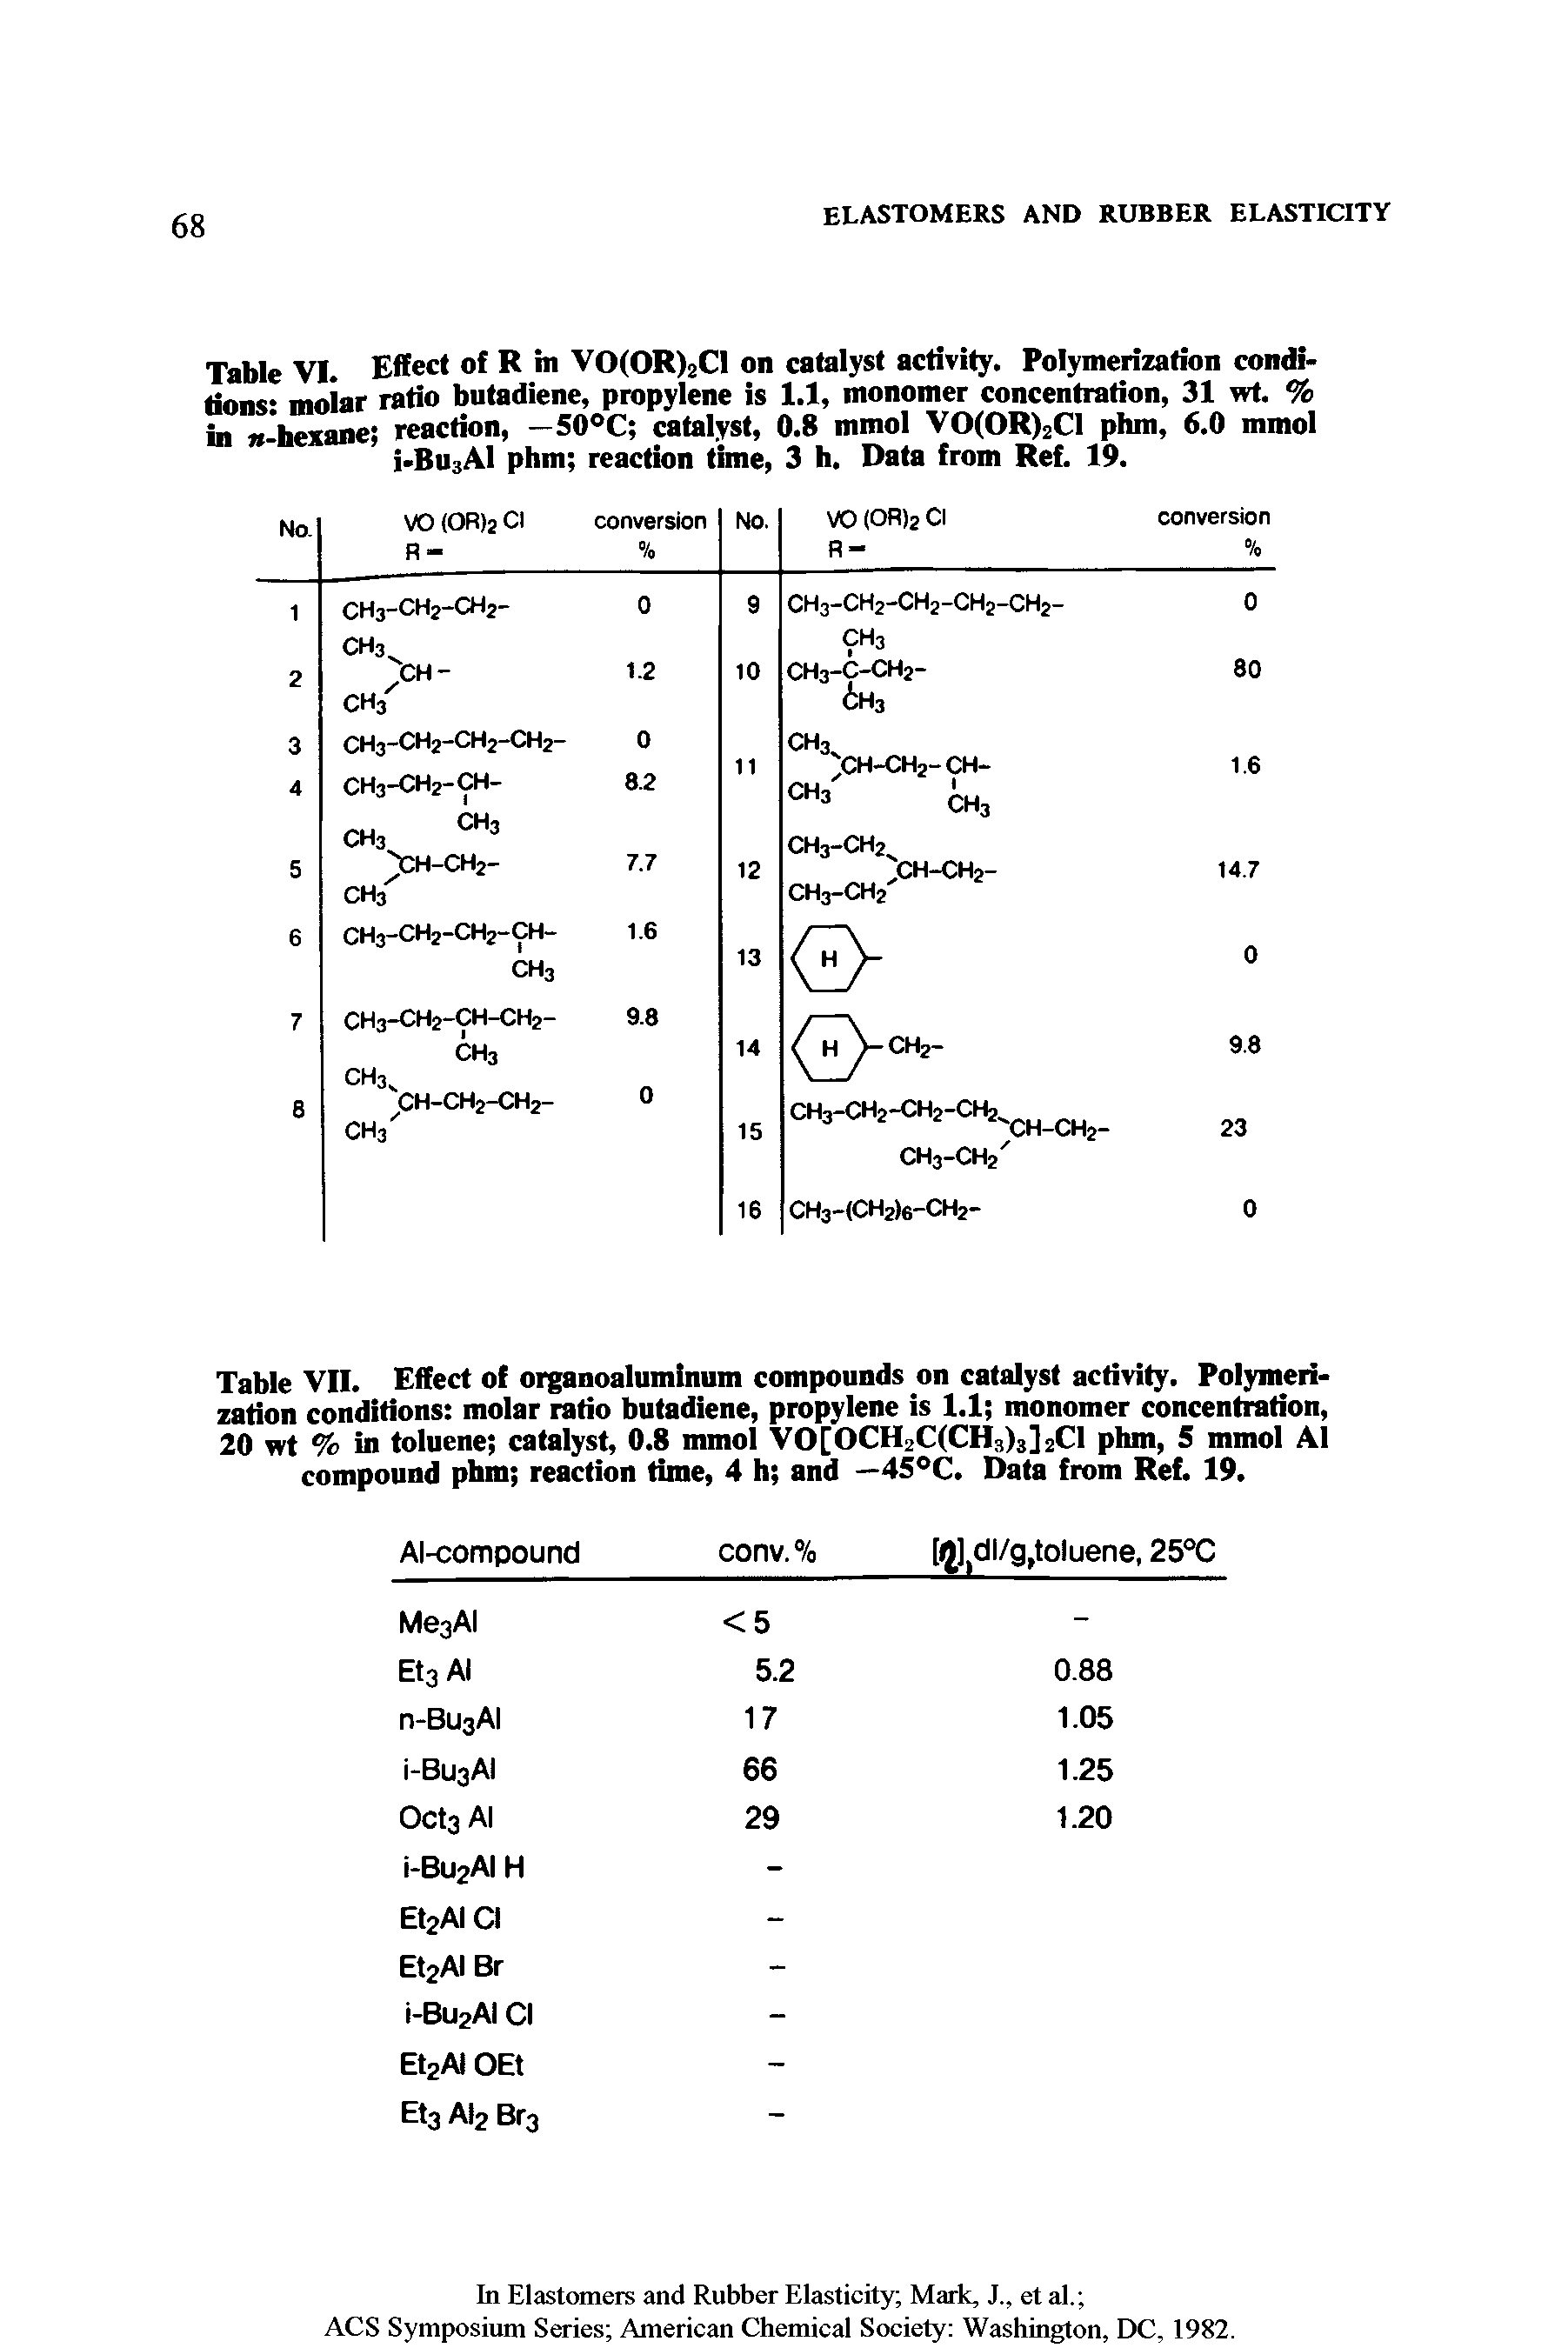 Table VI. Effect of R m VO(OR)2Cl on catalyst activity. Polymerization conditions moiar ratio butadiene, propylene is 1.1, monomer concentration, 31 wt. % in -hexane reaction, — 50°C catalyst, 0.8 mmol VO(OR)2Cl phm, 6.0 mmol i-Bu3Al phm reaction time, 3 h. Data from Ref. 19.